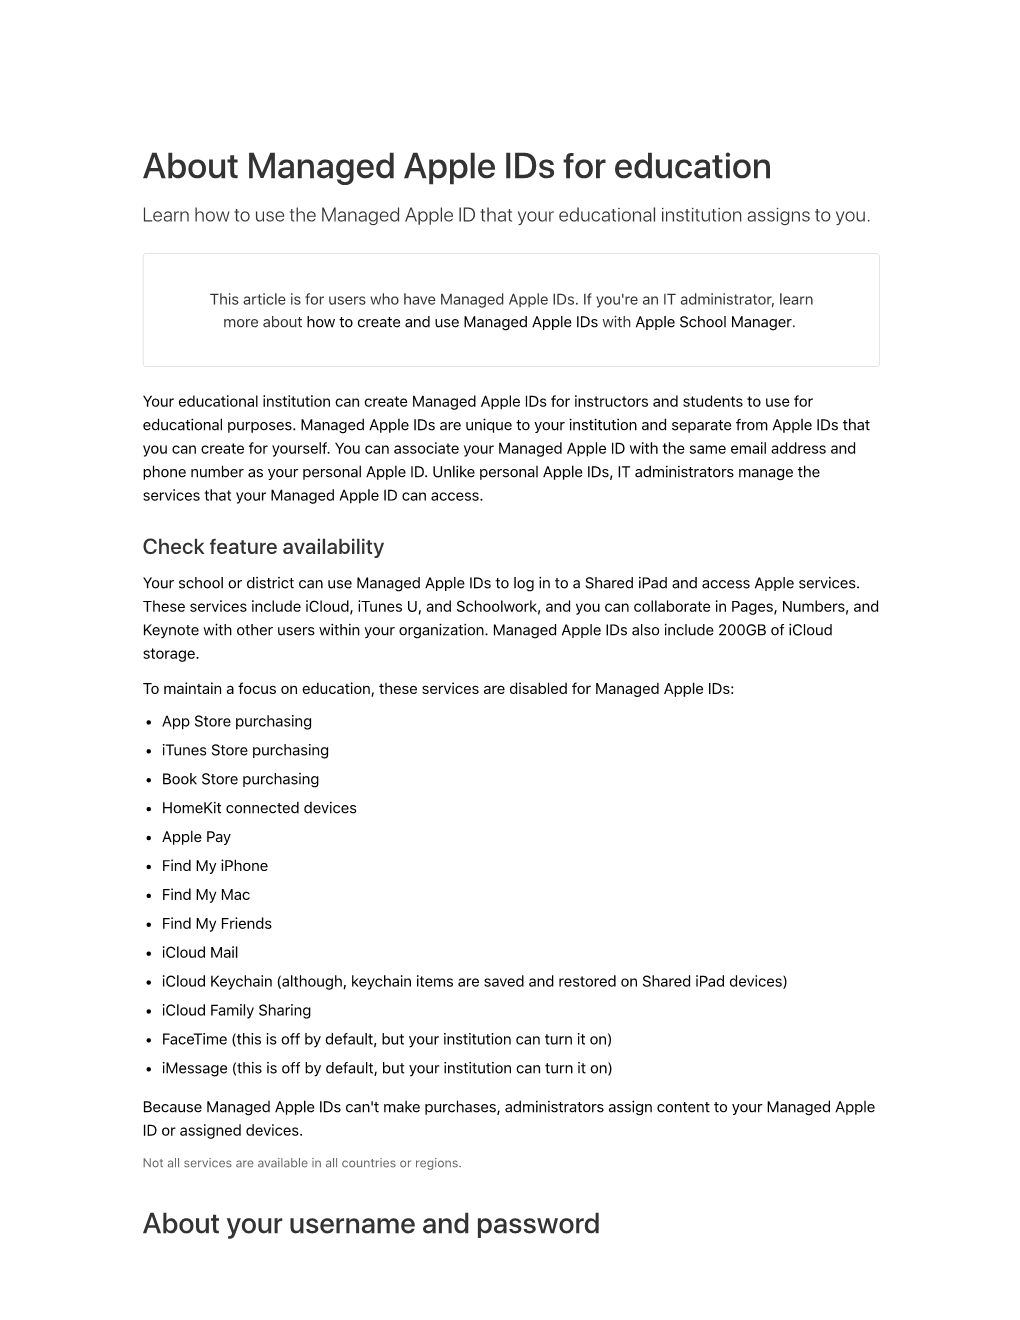 About Managed Apple Ids for Education Learn How to Use the Managed Apple ID That Your Educational Institution Assigns to You